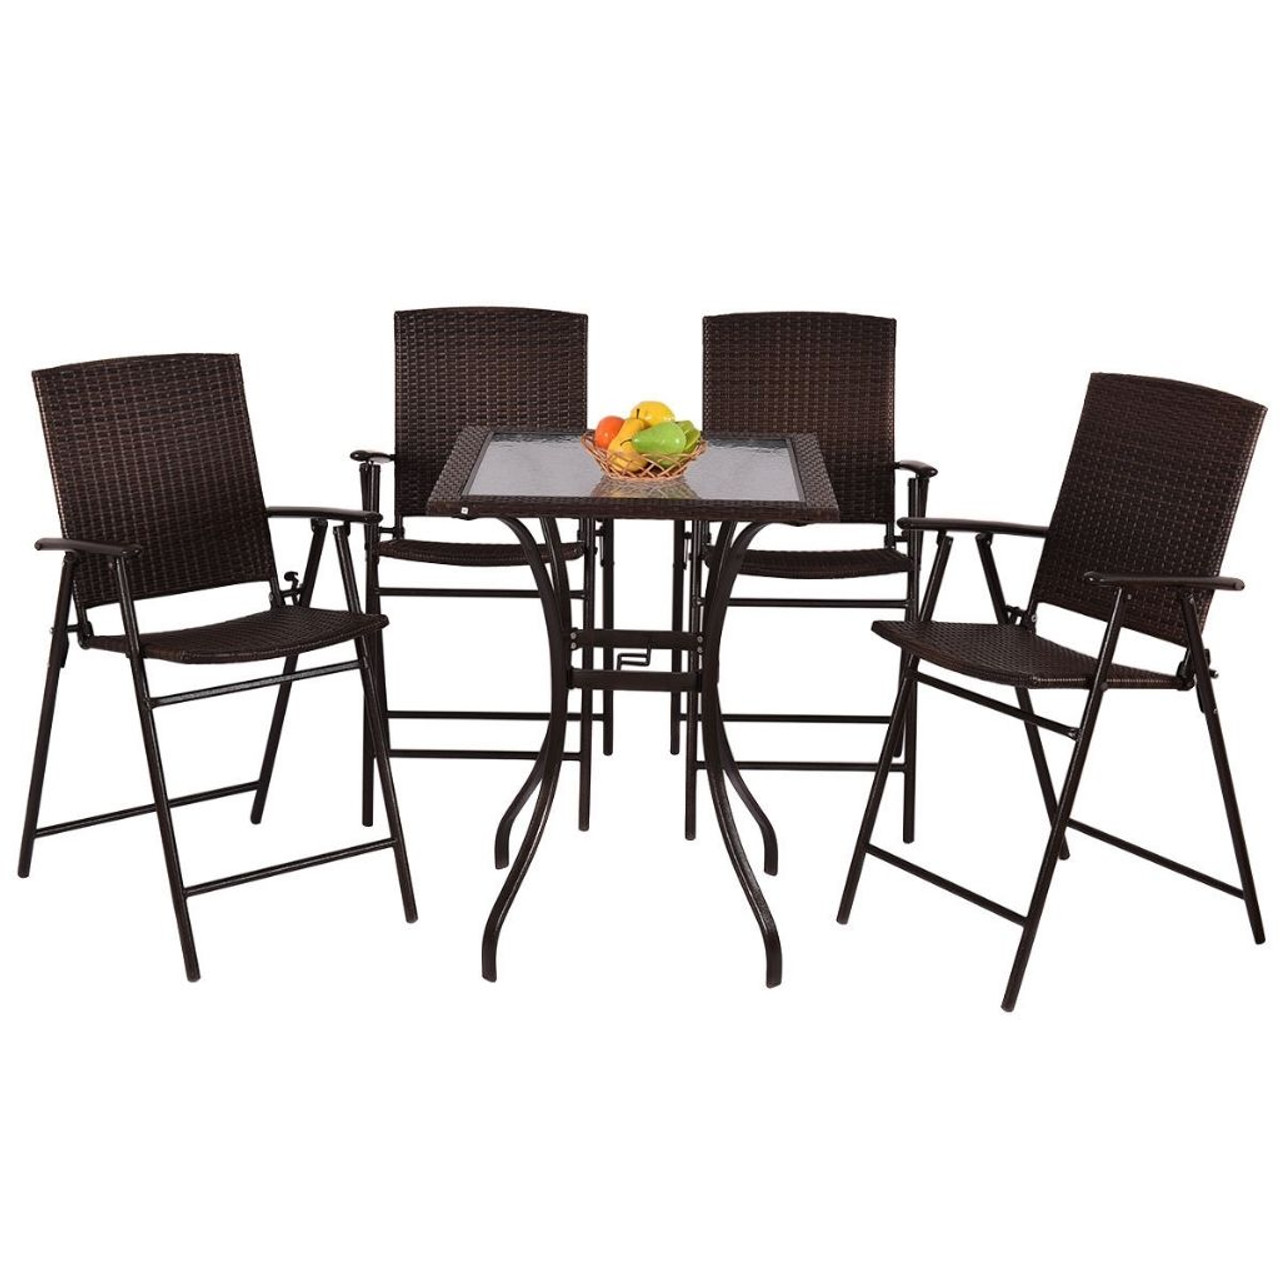 5-Piece Rattan and Glass Bar Height Dining Table Patio Set product image